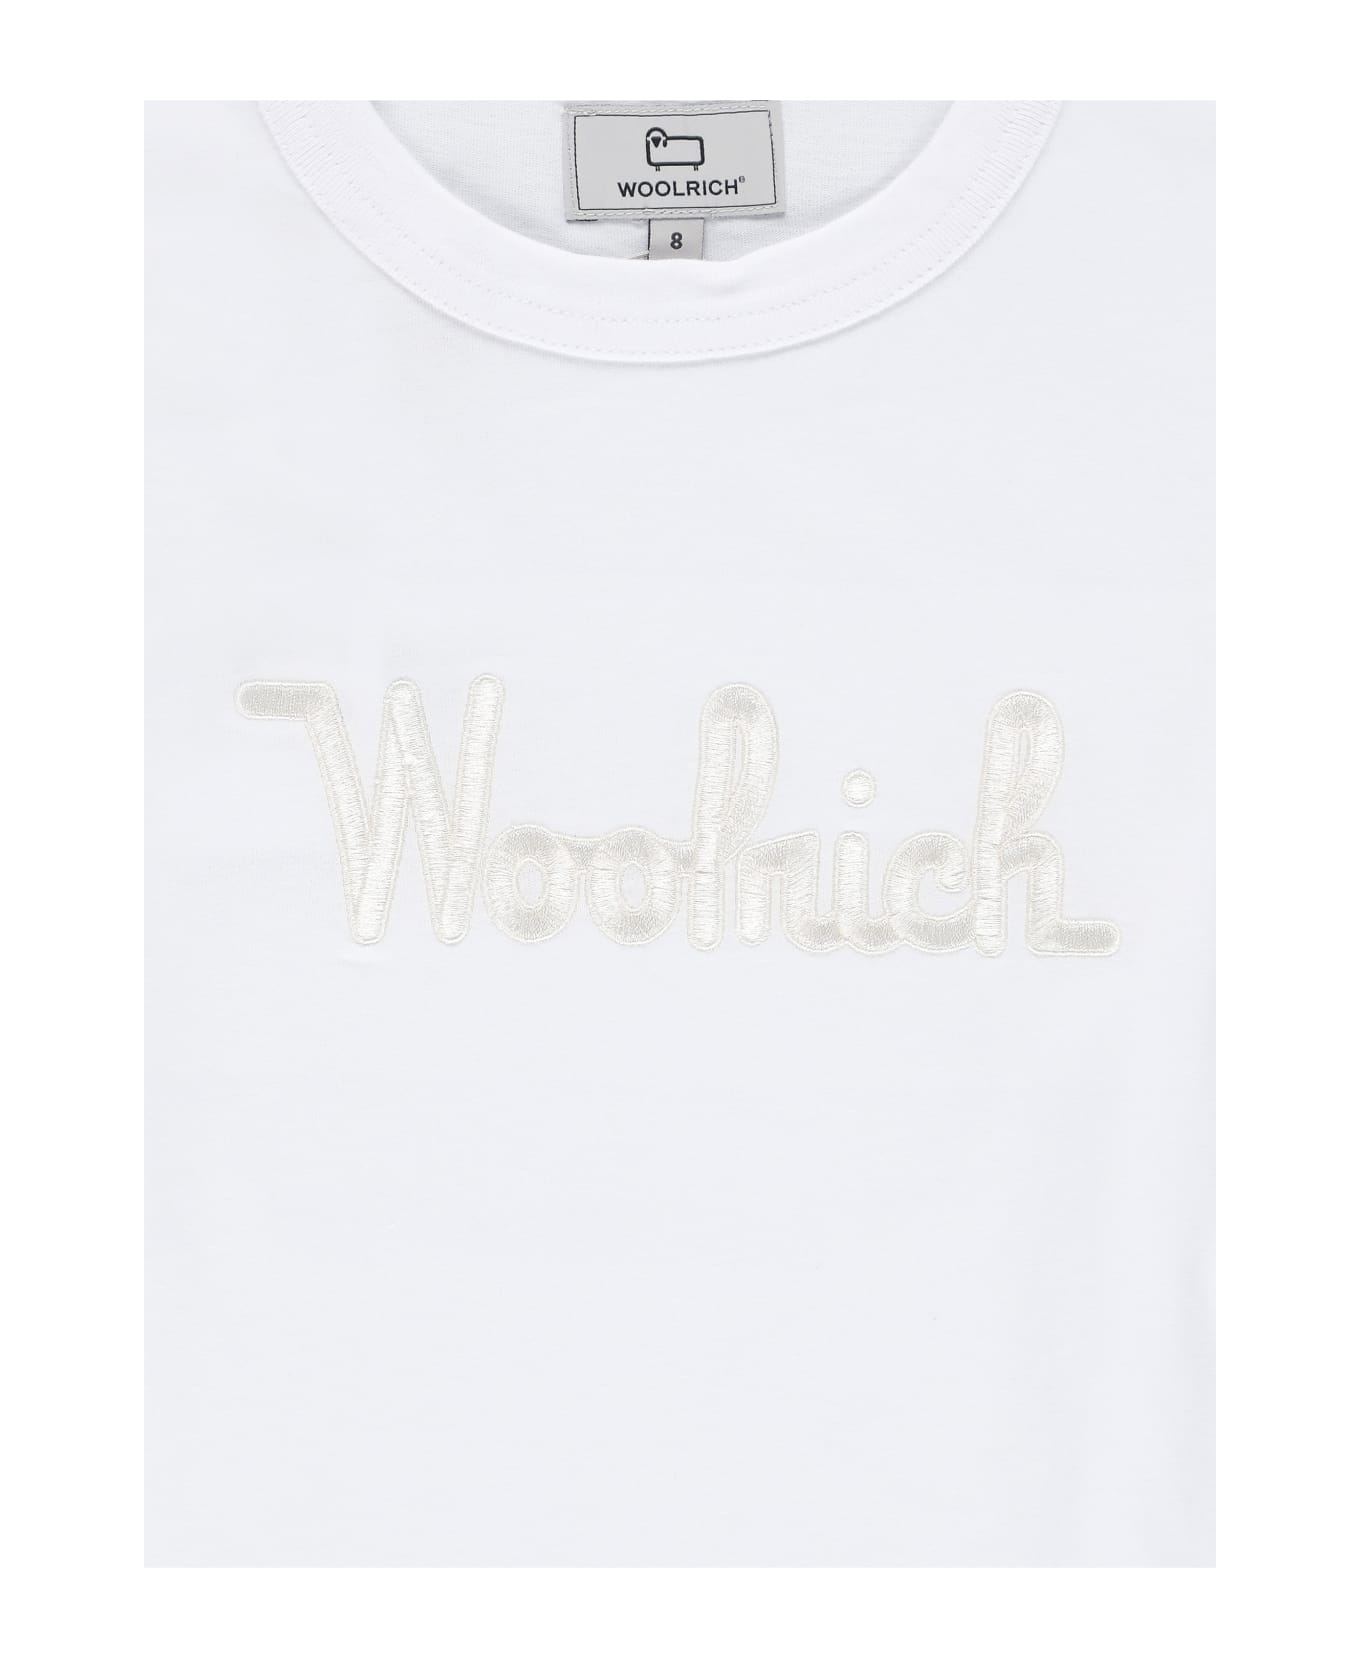 Woolrich T-shirt With Logo - WHITE Tシャツ＆ポロシャツ